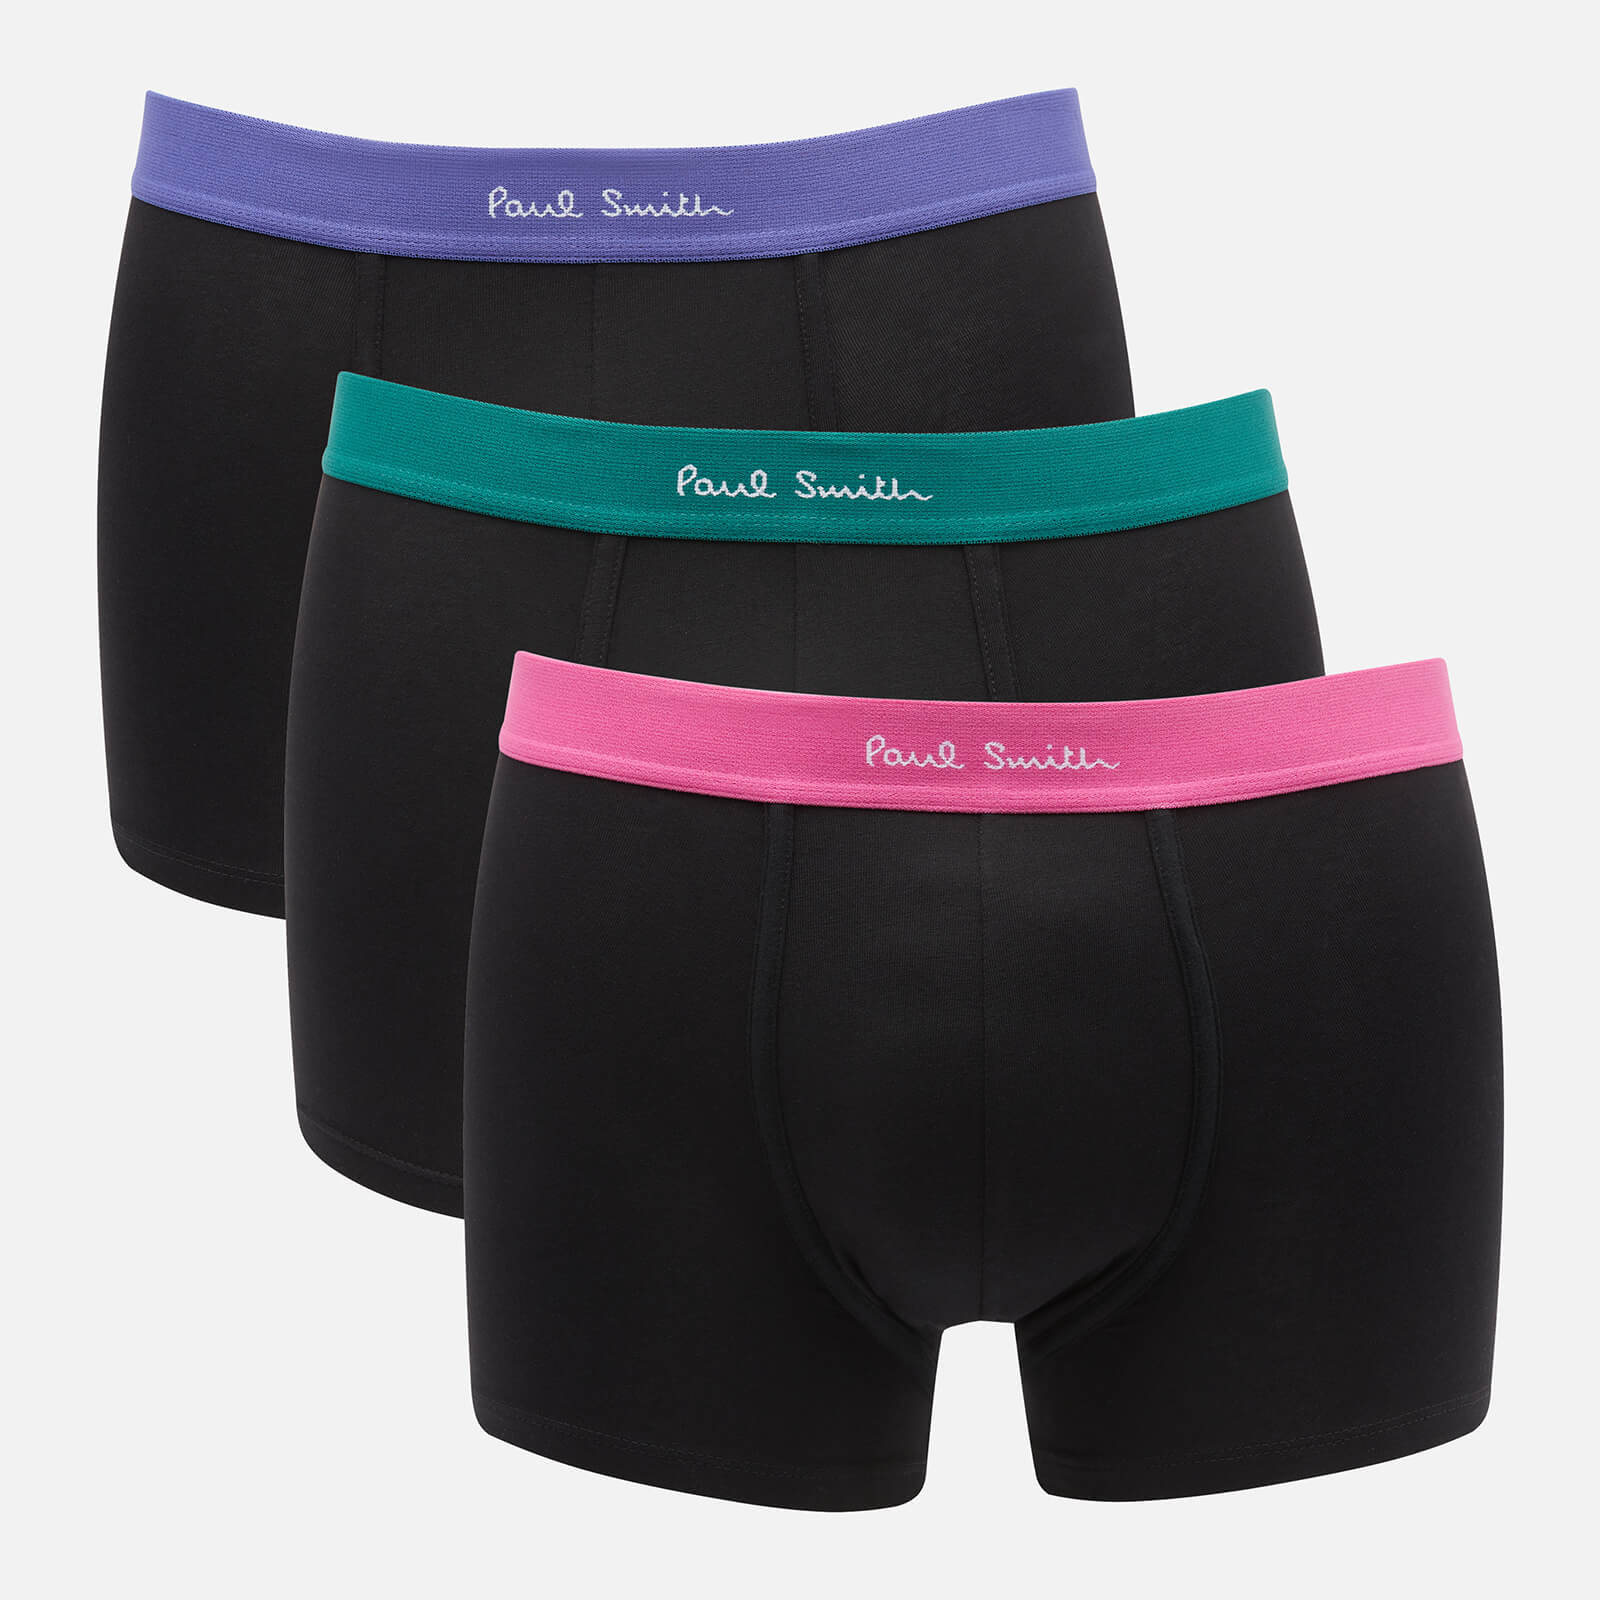 PS Paul Smith Men's 3-Pack Contrast Waistband Trunks - Blue/Pink/Green - S